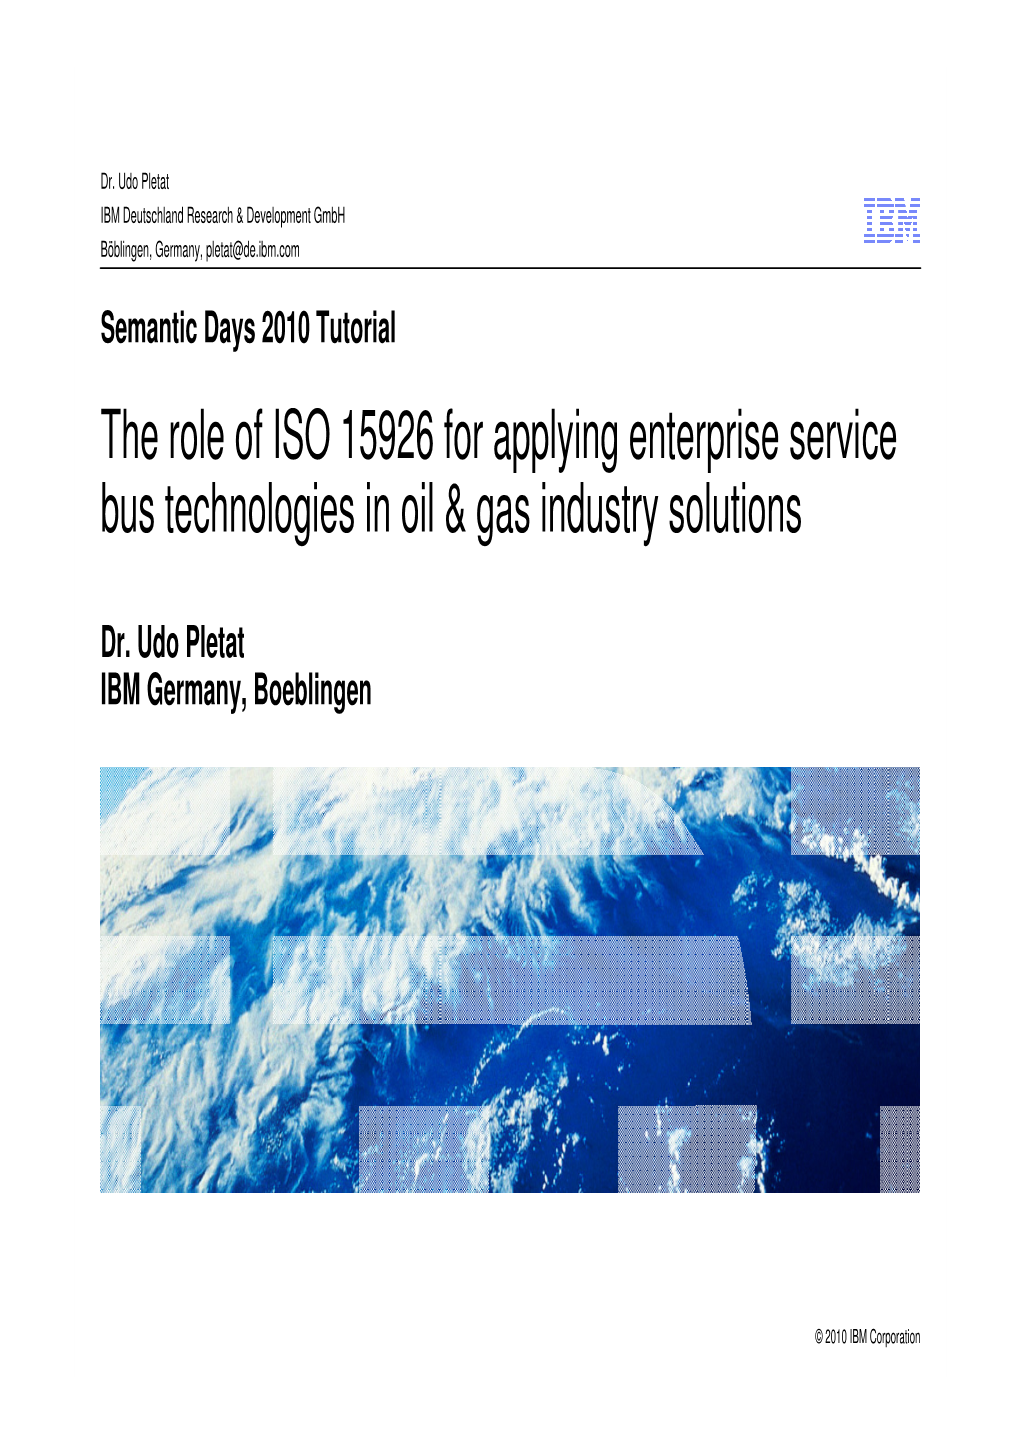 The Role of ISO 15926 for Applying Enterprise Service Bus Technologies in Oil & Gas Industry Solutions